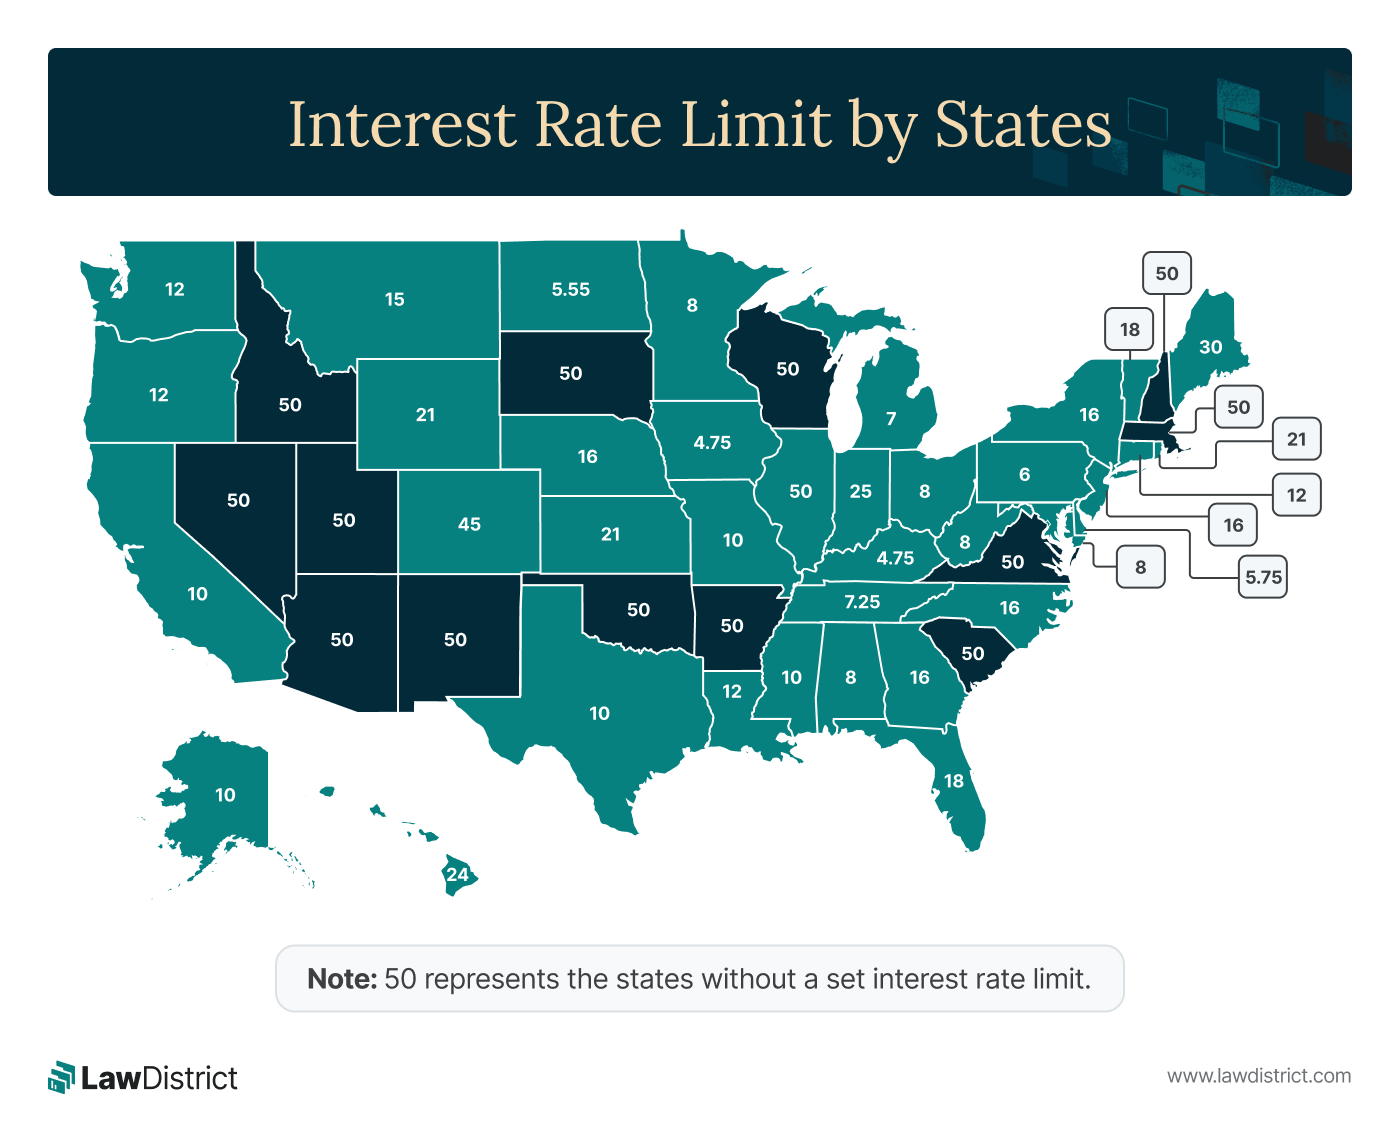 Interest rate limits by state